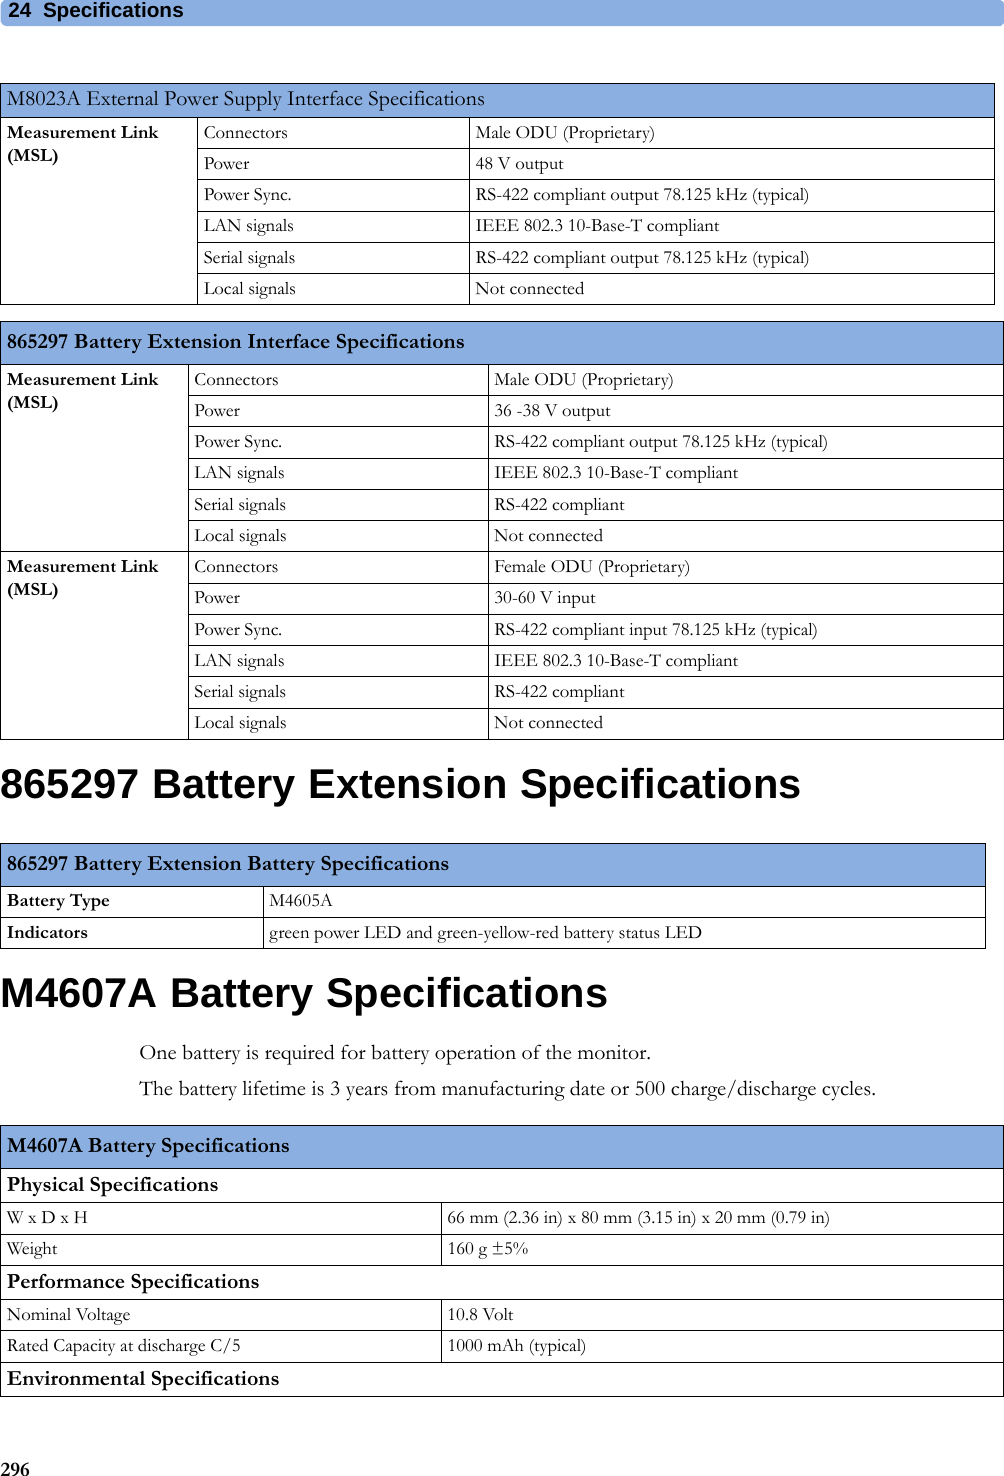 24 Specifications296865297 Battery Extension SpecificationsM4607A Battery SpecificationsOne battery is required for battery operation of the monitor.The battery lifetime is 3 years from manufacturing date or 500 charge/discharge cycles.M8023A External Power Supply Interface SpecificationsMeasurement Link (MSL)Connectors Male ODU (Proprietary)Power 48 V outputPower Sync. RS-422 compliant output 78.125 kHz (typical)LAN signals IEEE 802.3 10-Base-T compliantSerial signals RS-422 compliant output 78.125 kHz (typical)Local signals Not connected865297 Battery Extension Interface SpecificationsMeasurement Link (MSL)Connectors Male ODU (Proprietary)Power 36 -38 V outputPower Sync. RS-422 compliant output 78.125 kHz (typical)LAN signals IEEE 802.3 10-Base-T compliantSerial signals RS-422 compliantLocal signals Not connectedMeasurement Link (MSL)Connectors Female ODU (Proprietary)Power 30-60 V inputPower Sync. RS-422 compliant input 78.125 kHz (typical)LAN signals IEEE 802.3 10-Base-T compliantSerial signals RS-422 compliantLocal signals Not connected865297 Battery Extension Battery SpecificationsBattery Type M4605AIndicators green power LED and green-yellow-red battery status LEDM4607A Battery SpecificationsPhysical SpecificationsW x D x H 66 mm (2.36 in) x 80 mm (3.15 in) x 20 mm (0.79 in)Weight 160 g ±5%Performance SpecificationsNominal Voltage 10.8 VoltRated Capacity at discharge C/5 1000 mAh (typical)Environmental Specifications